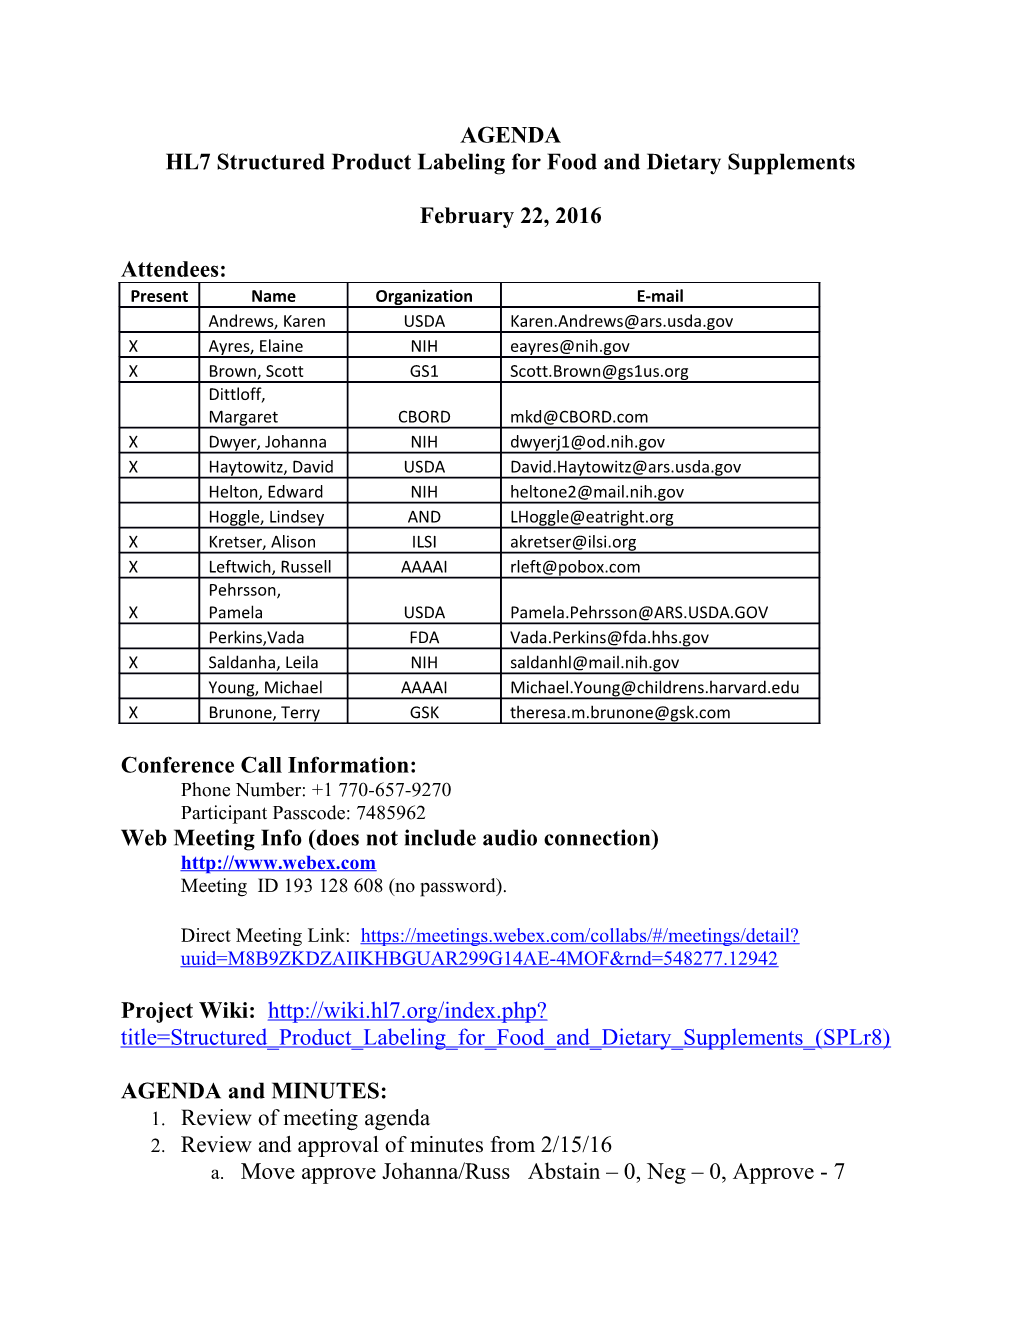 HL7 Structured Product Labeling for Food and Dietary Supplements